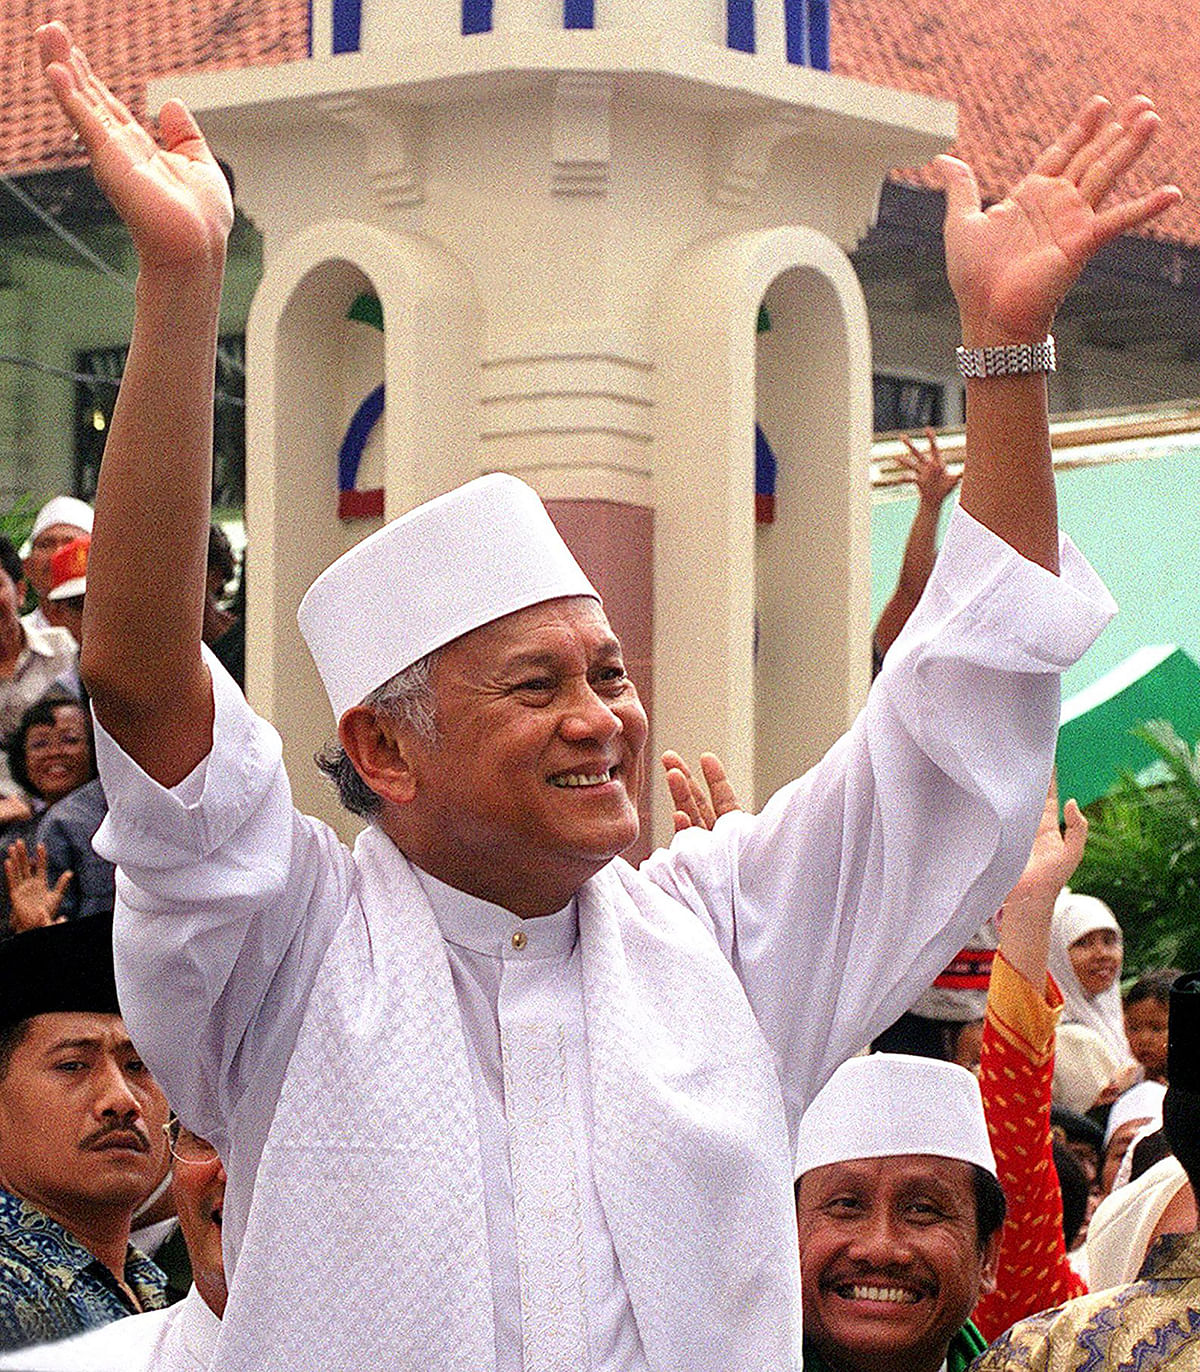 This file photo taken on 26 June 1999 shows then-Indonesian President B.J. Habibie waving to a crowd after opening the 9 Teachers (Wali Songo) International Festival at Surabaya. Photo: AFP